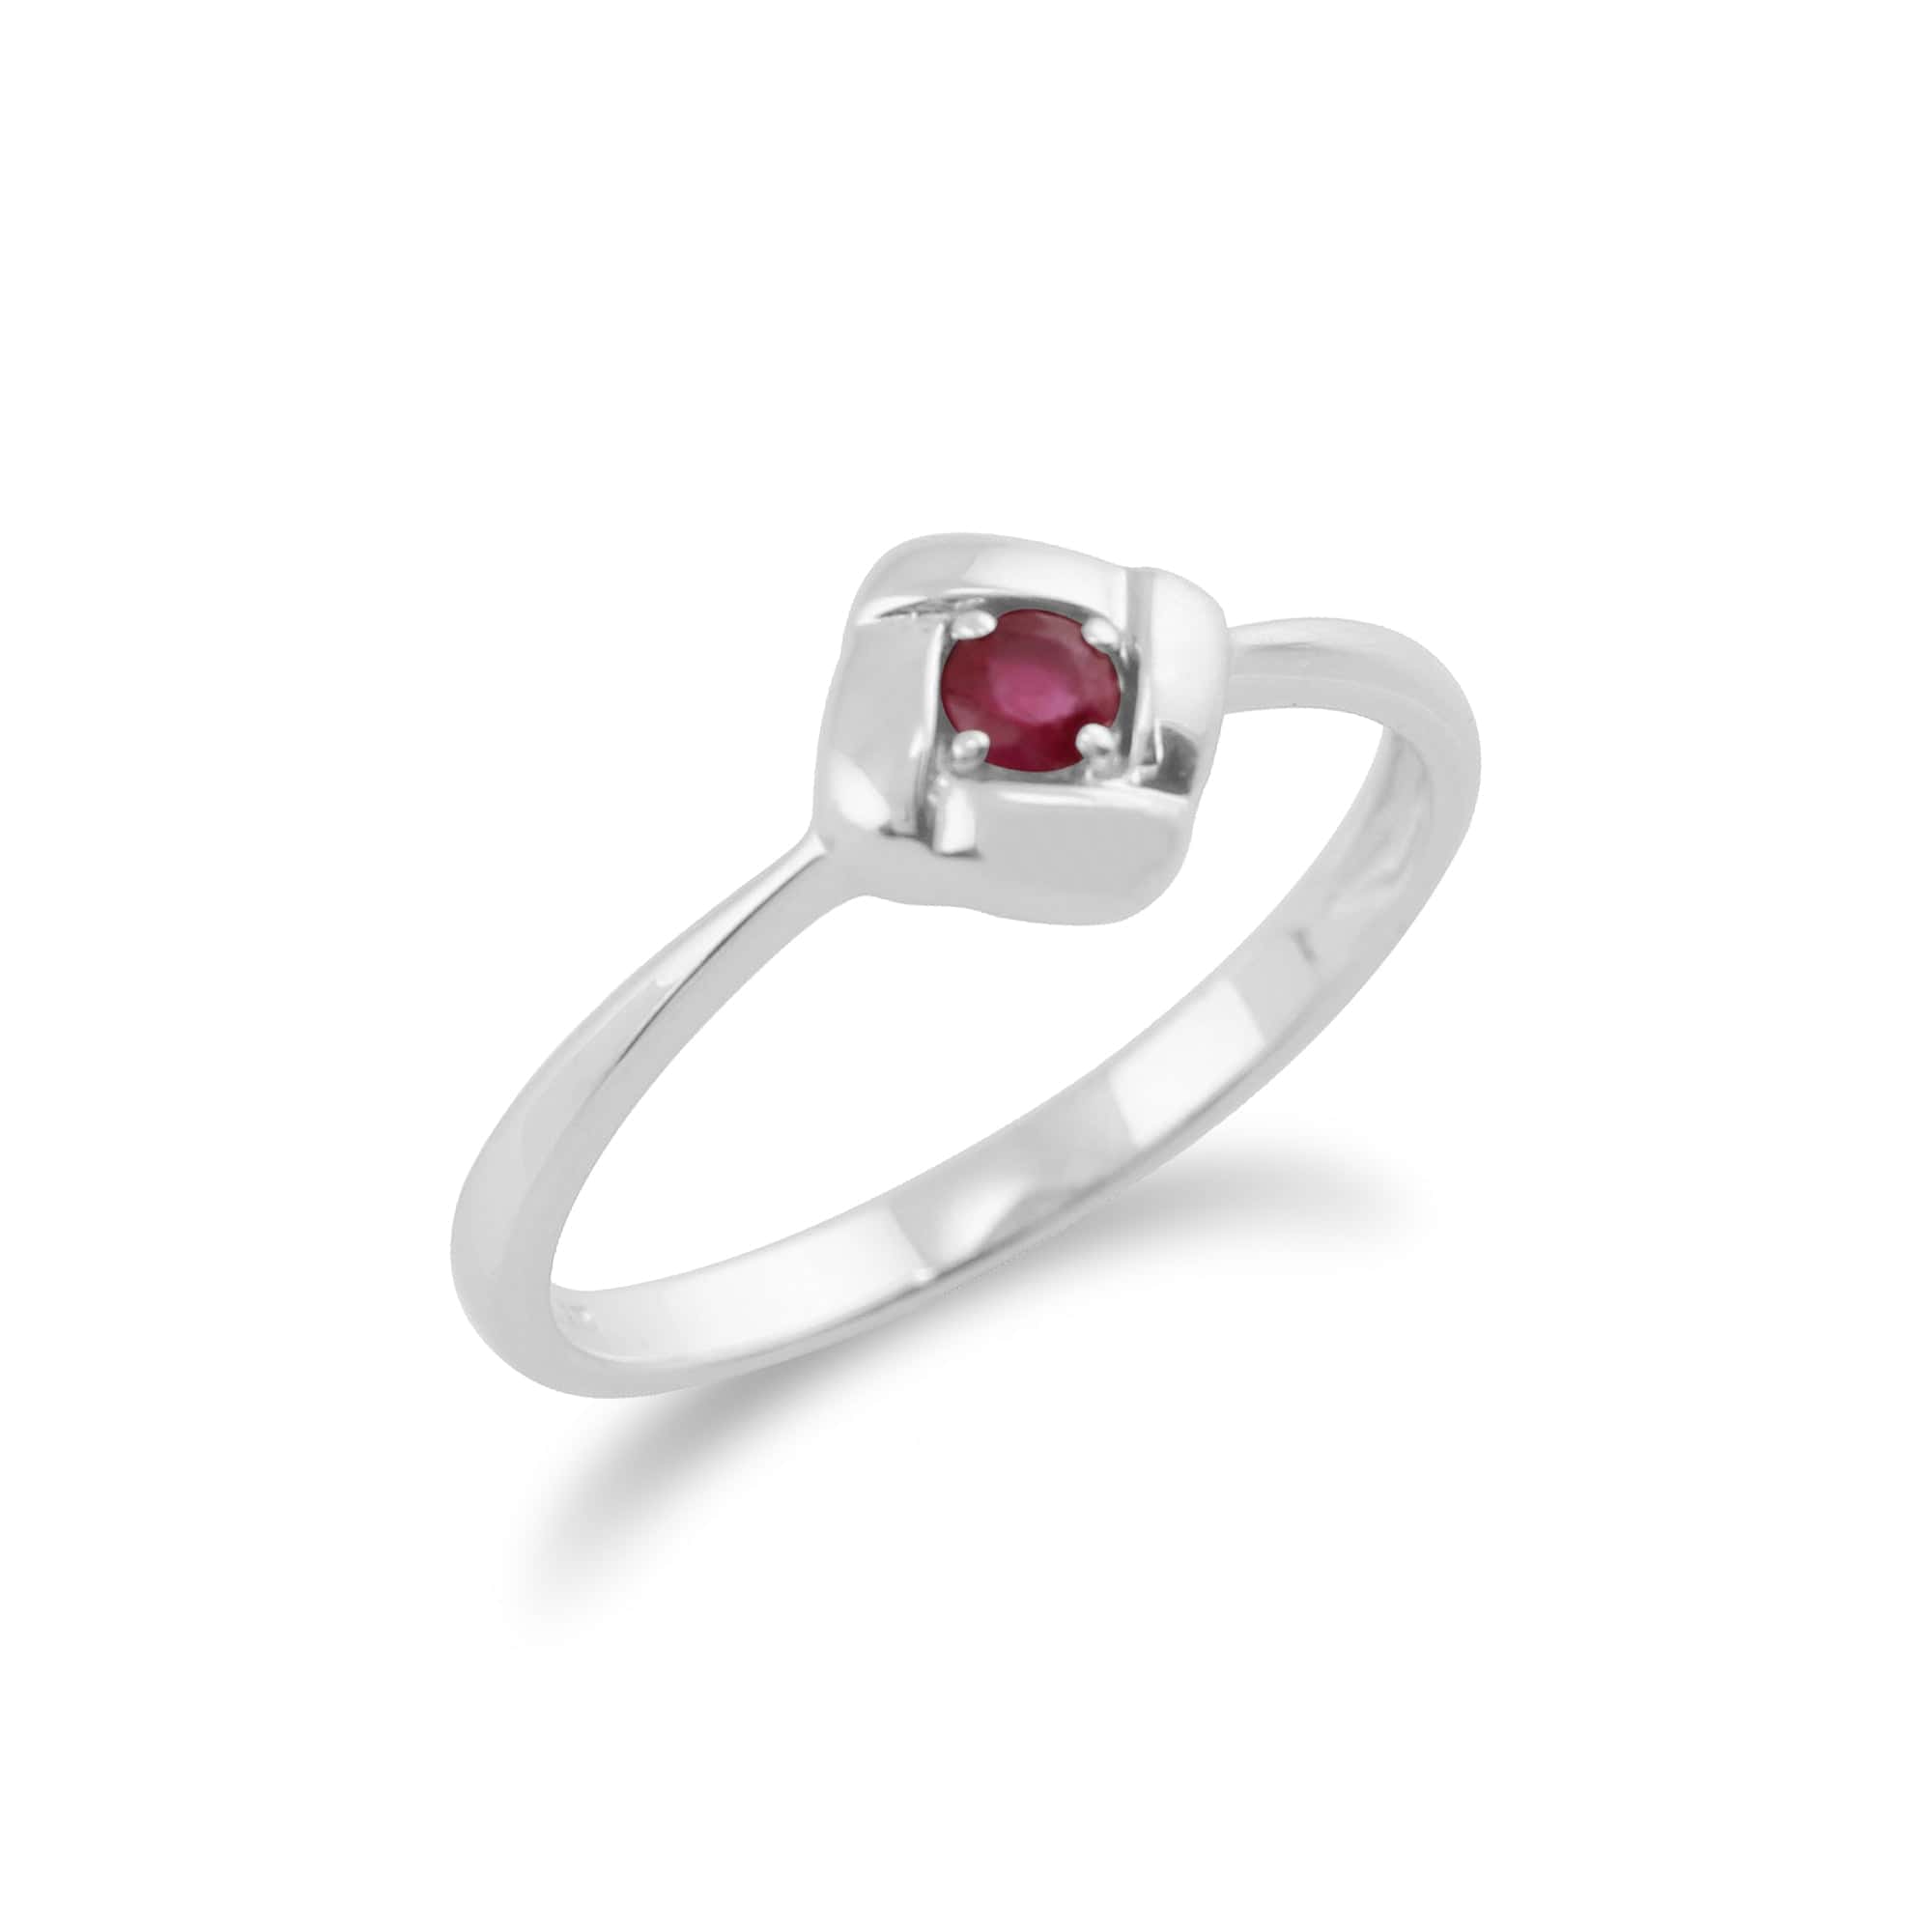 Gemondo 925 Sterling Silver 0.14ct Ruby Square Crossover Ring Image 2